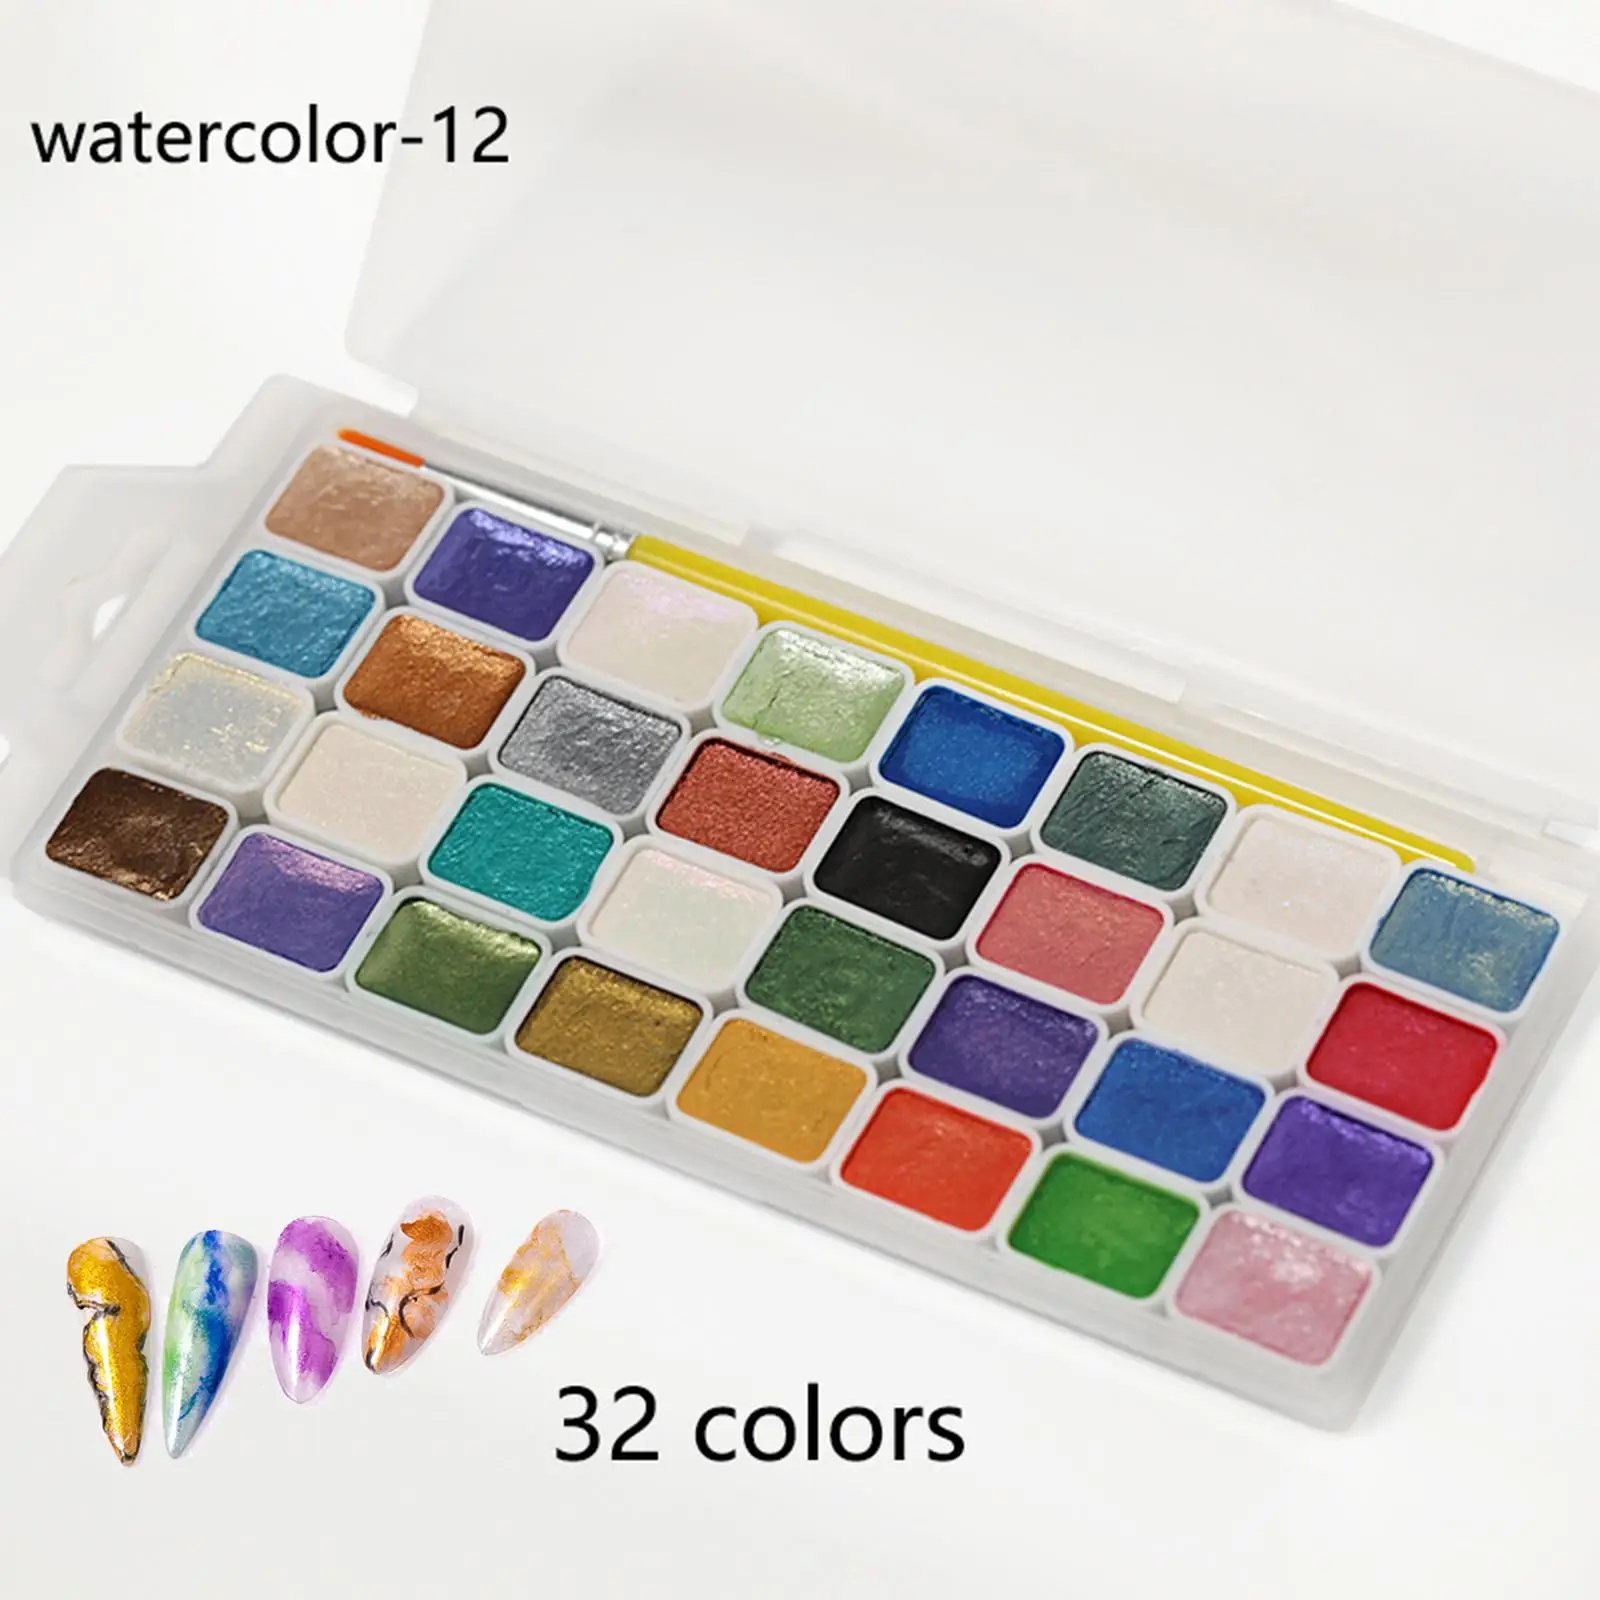 Glitter 32 Colors Solid Watercolor Paints Set Pearlescent DIY Nail Art Metallic Gouache Paint Set for Students Hobbyists